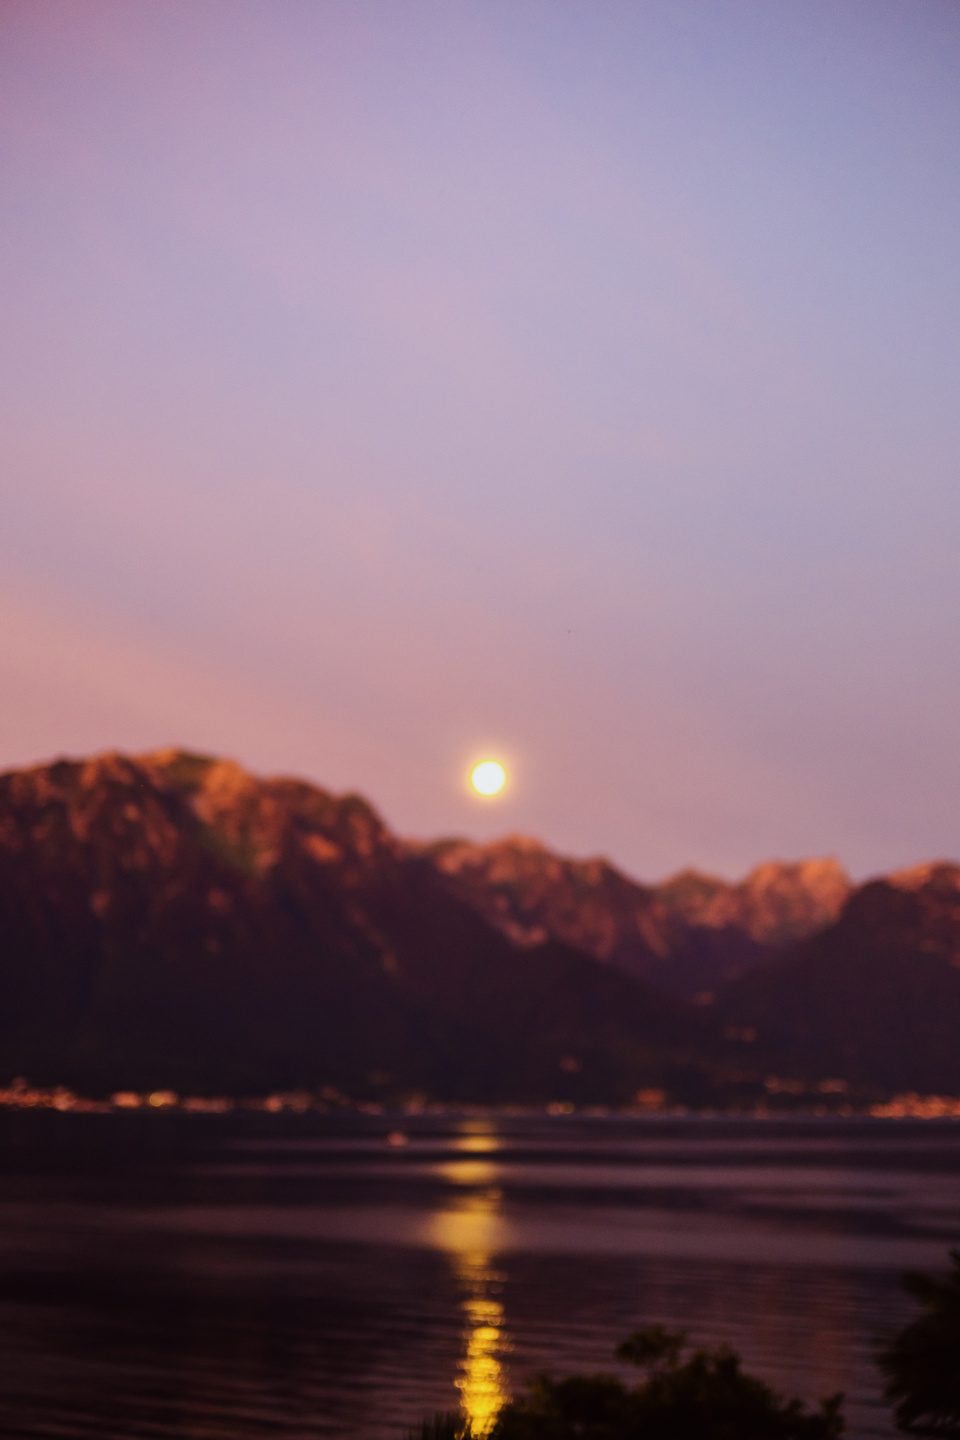 Moon, mountains, and lake blurred